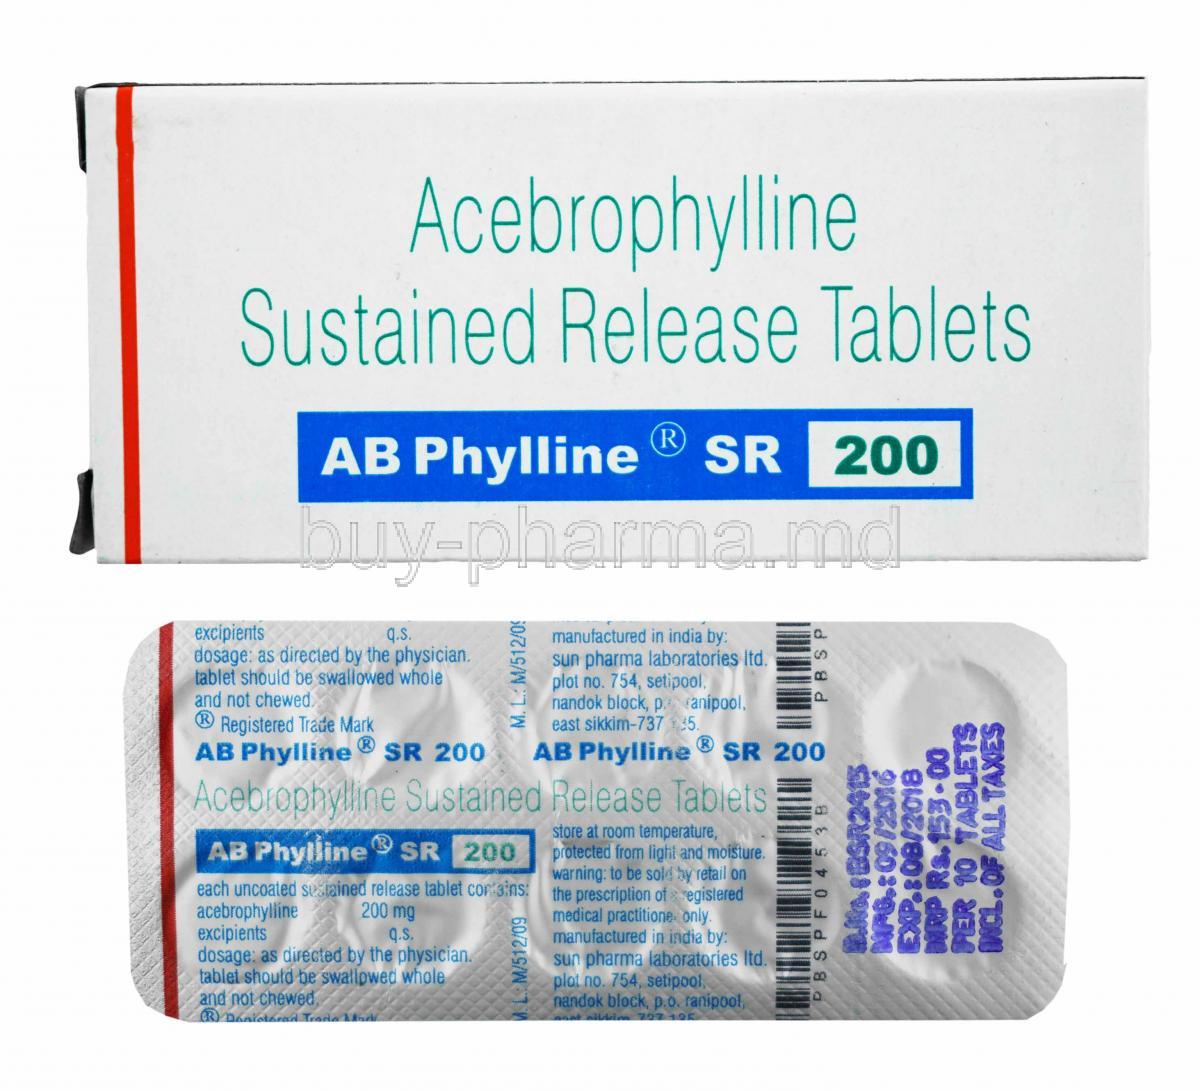 AB Phylline, Acebrophylline box and tablets